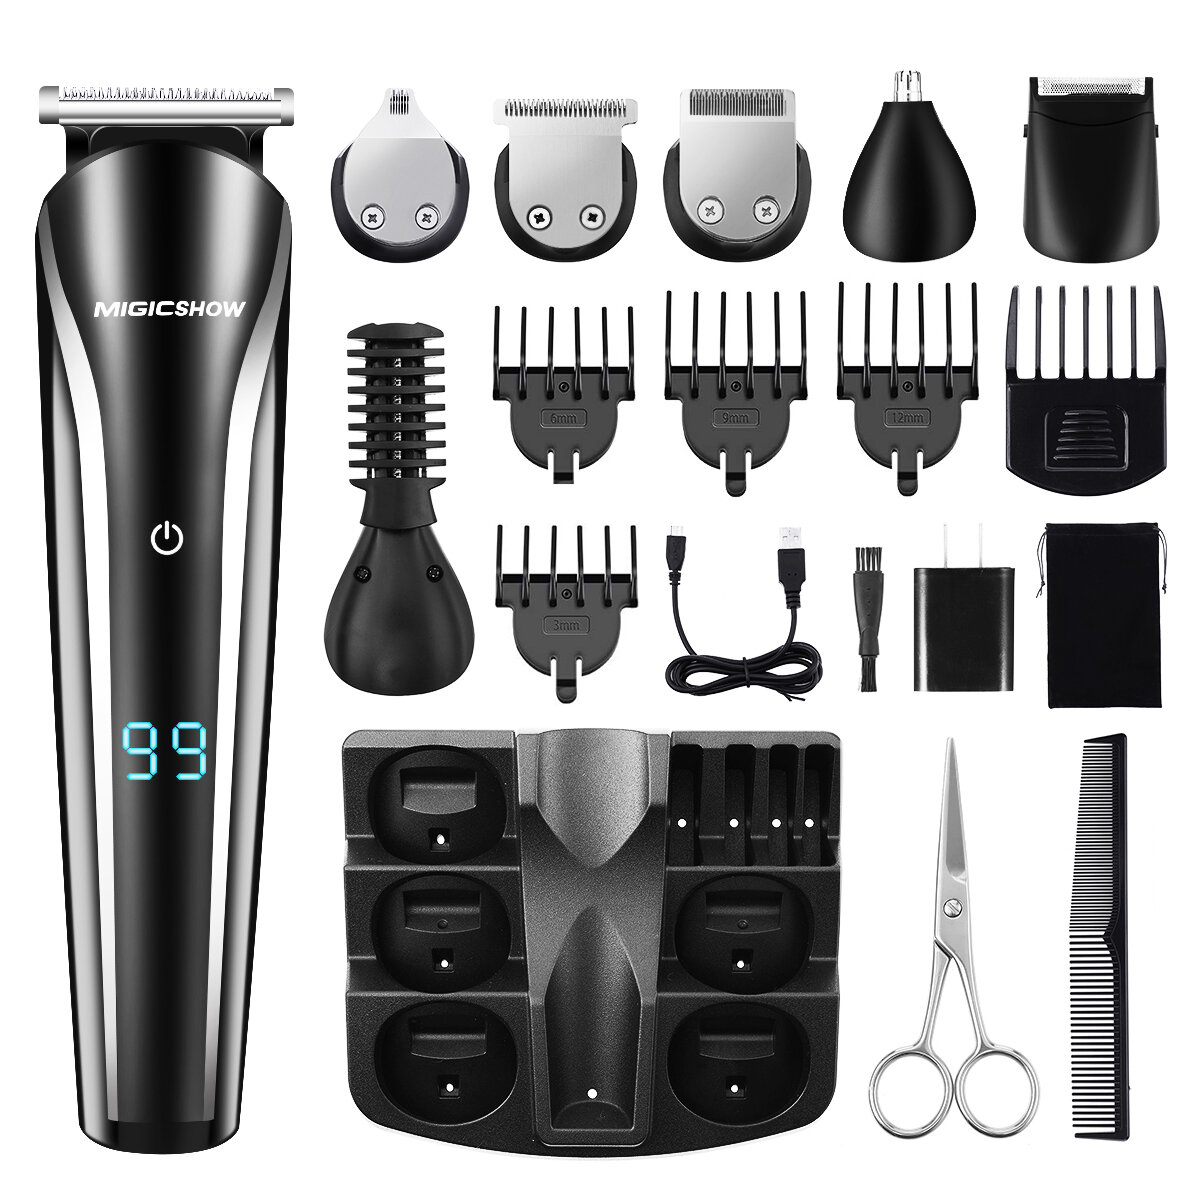 Professional Hair Trimmer Men MIGICSHOW Beard Trimmer Shaving 11 In 1 Electric...